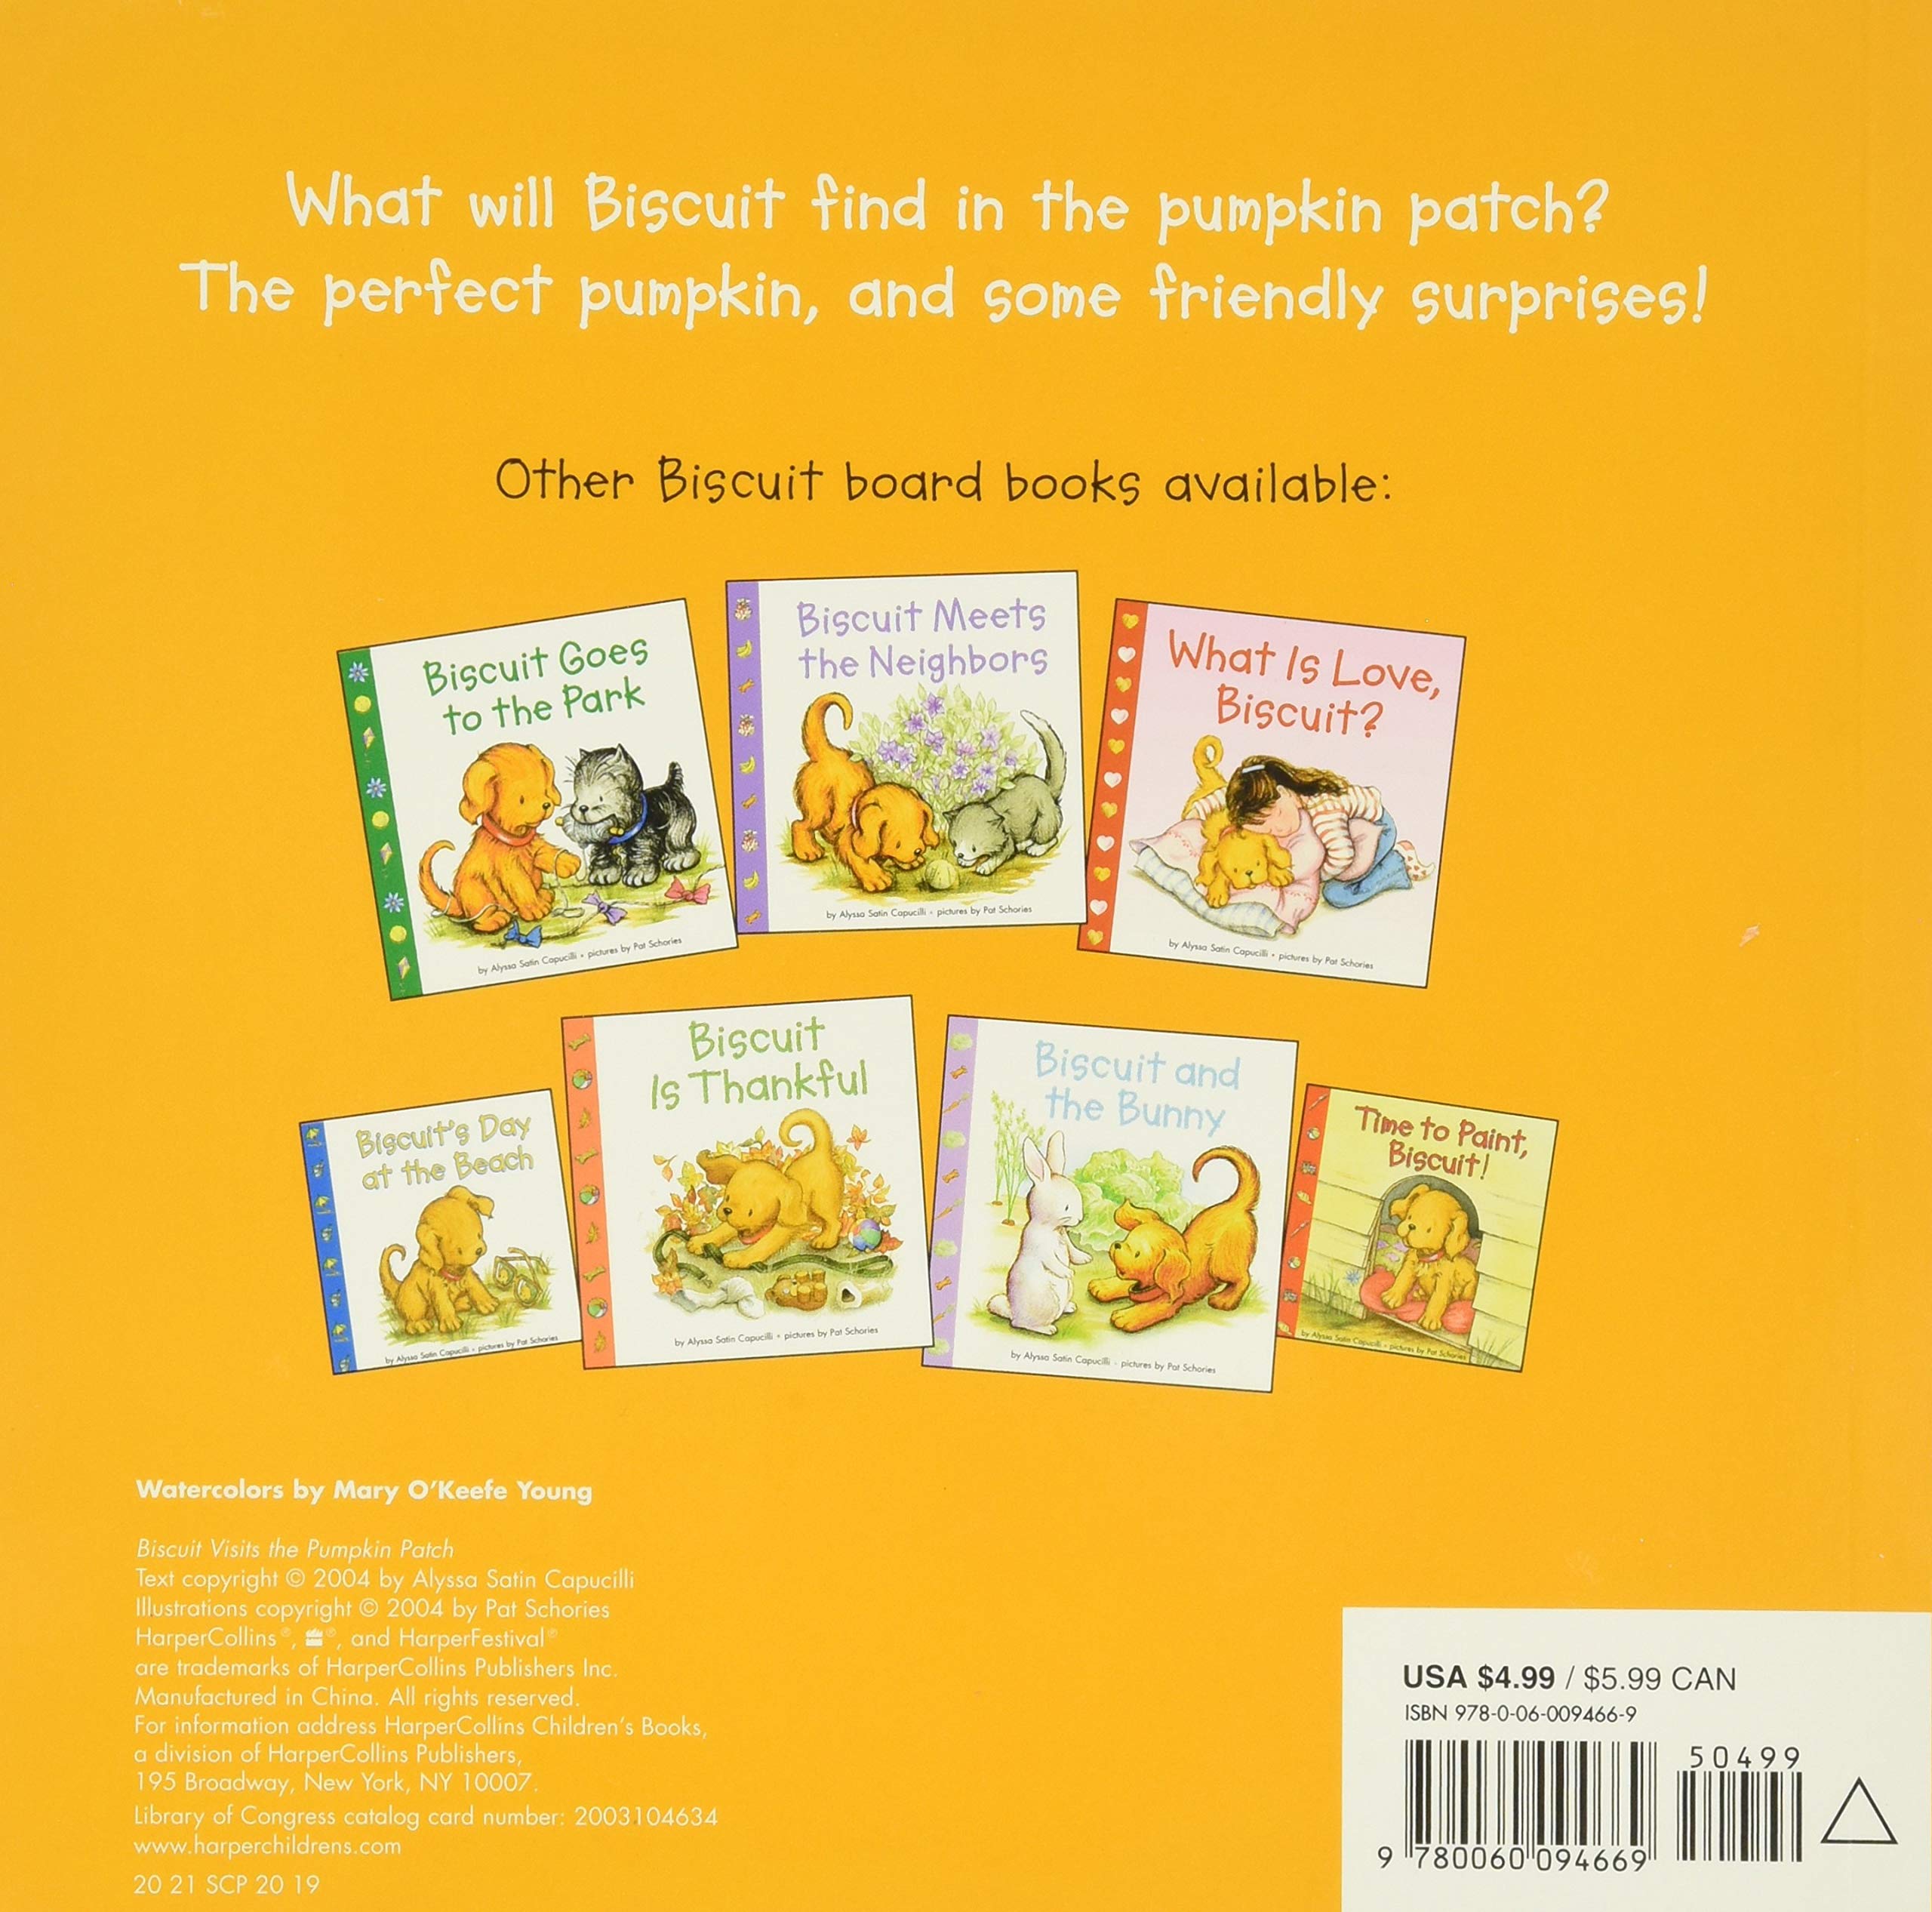 Biscuit Visits the Pumpkin Patch: A Fall and Halloween Book for Kids